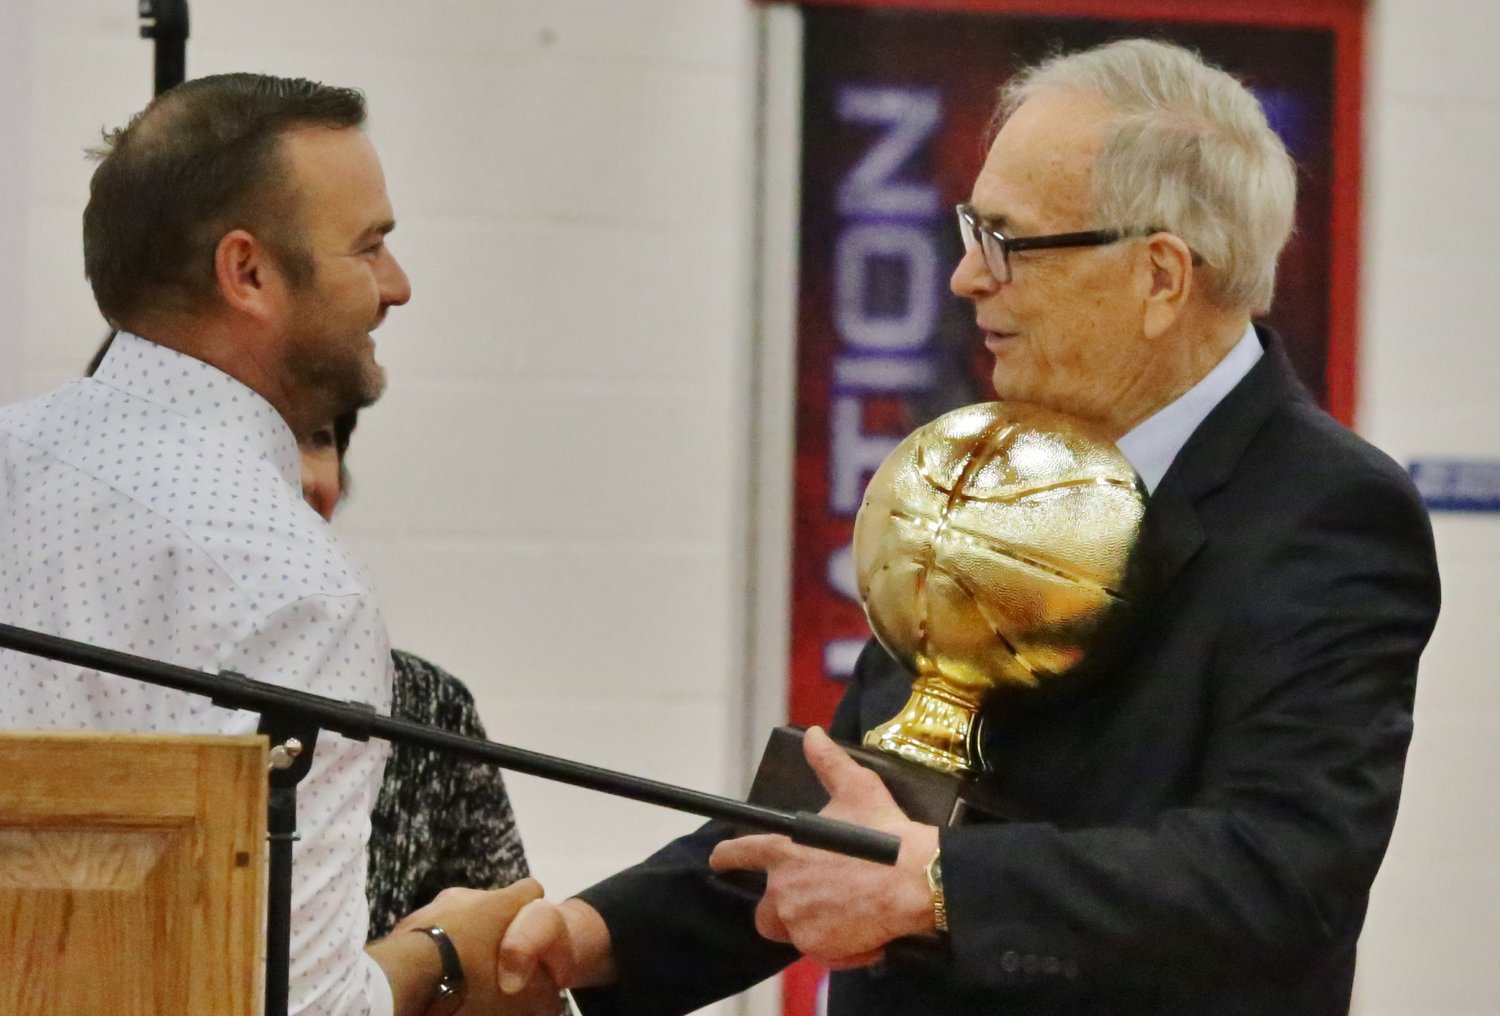 Alba-Golden Athletic Director Drew Webster presents guest speaker and sporting legend Carroll Dawson with a keepsake for his participation at the 2020-21 sports assembly last Wednesday.